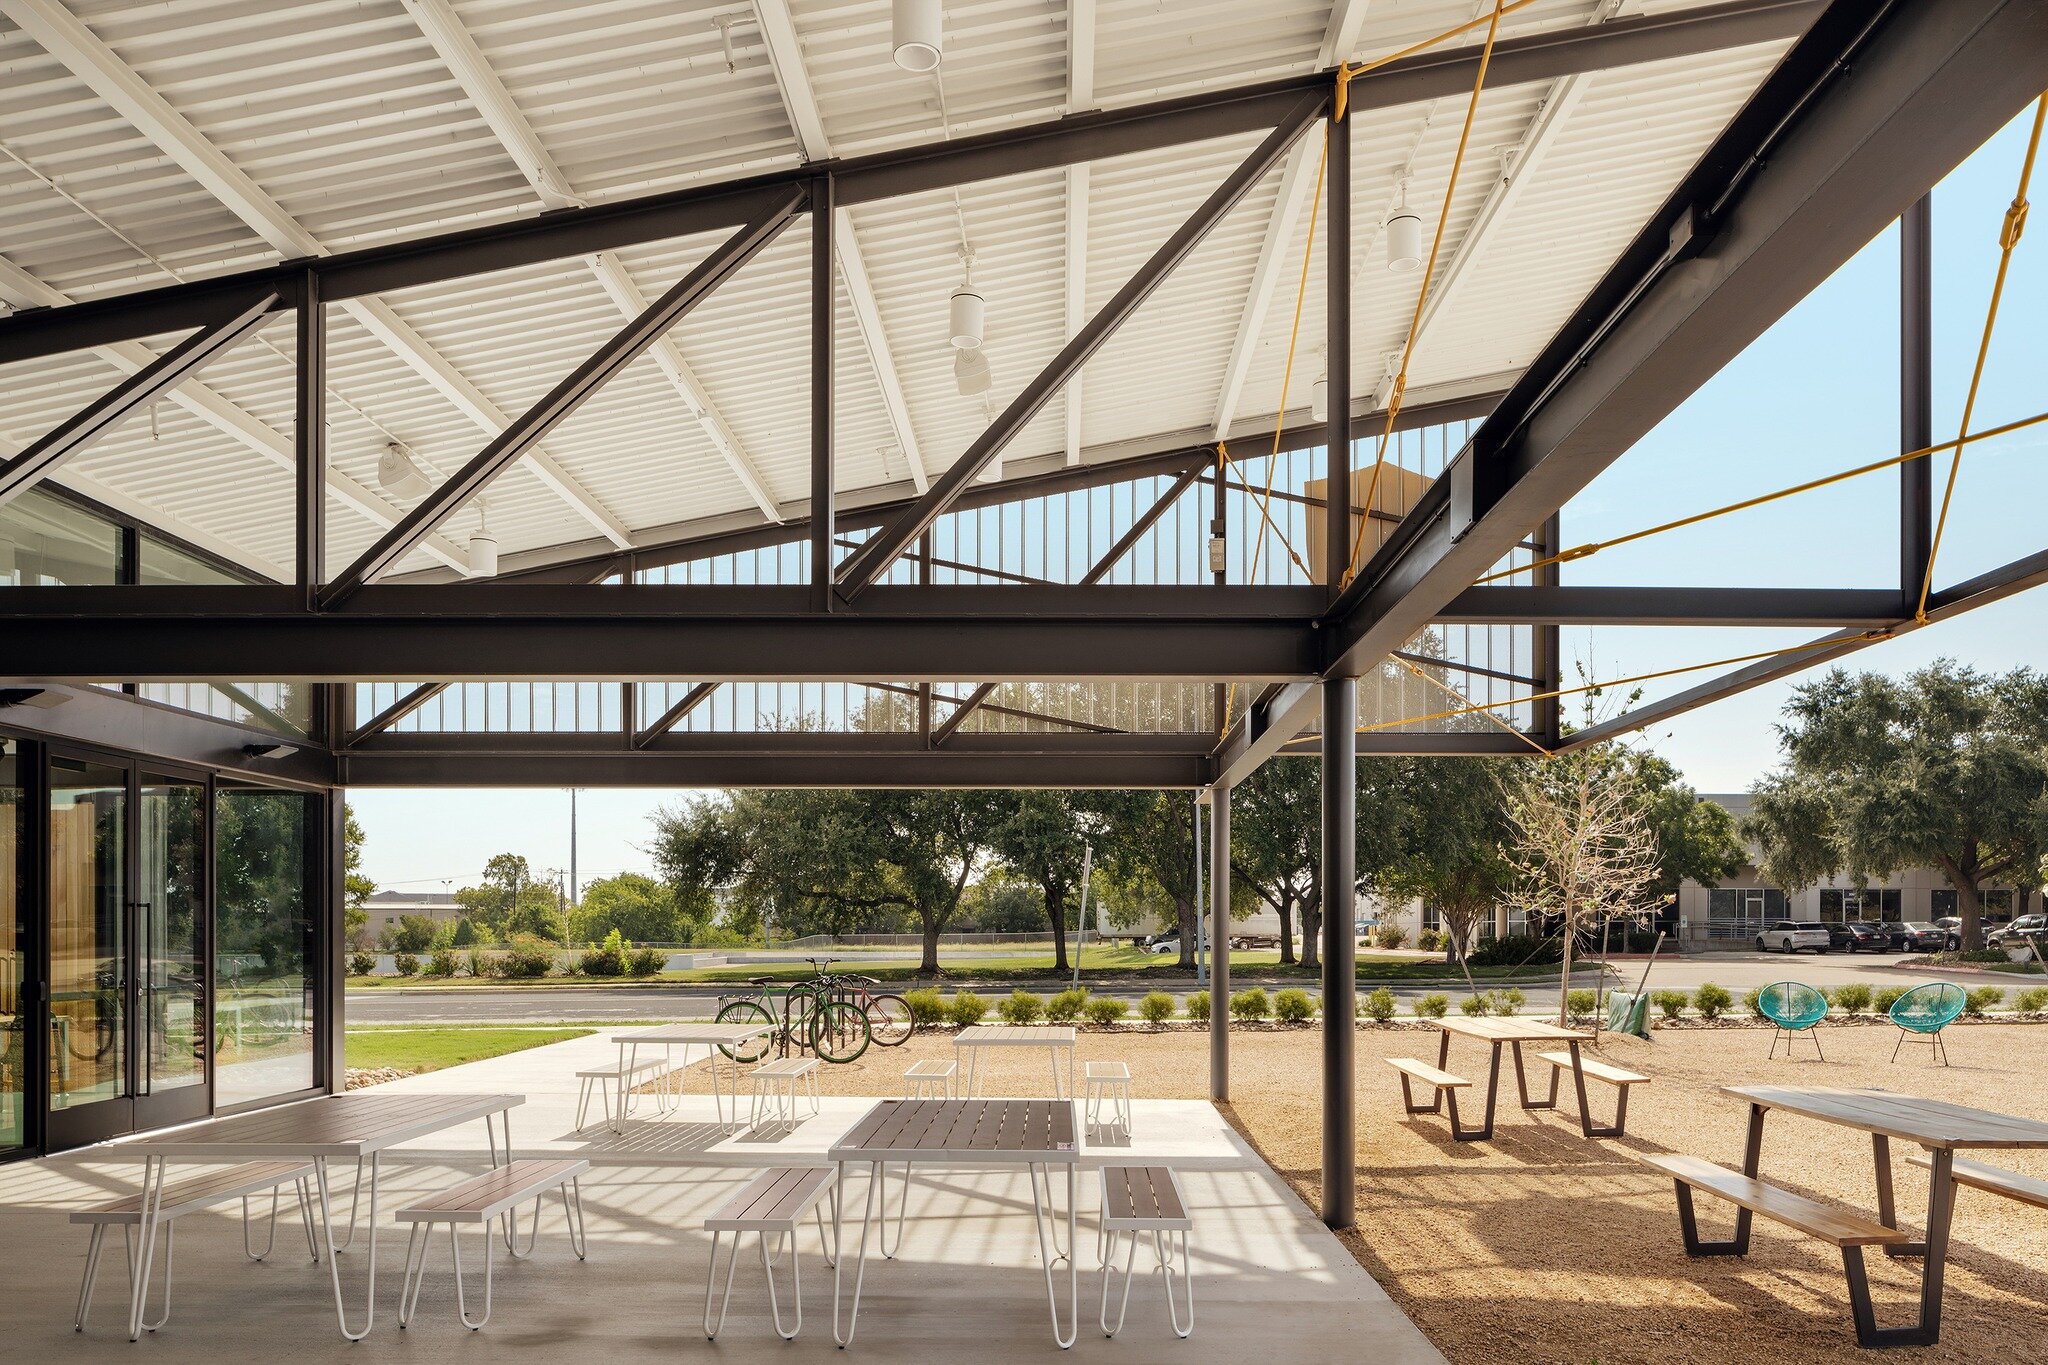 Ghostline Kitchens - Covered patio flex space used for outdoor dining, coffee breaks, and moments of fresh-air , effectively doubling the functional square footage of the @ghostlinekitchens demo kitchen and lobby space. 

#industrialarchitecture #res